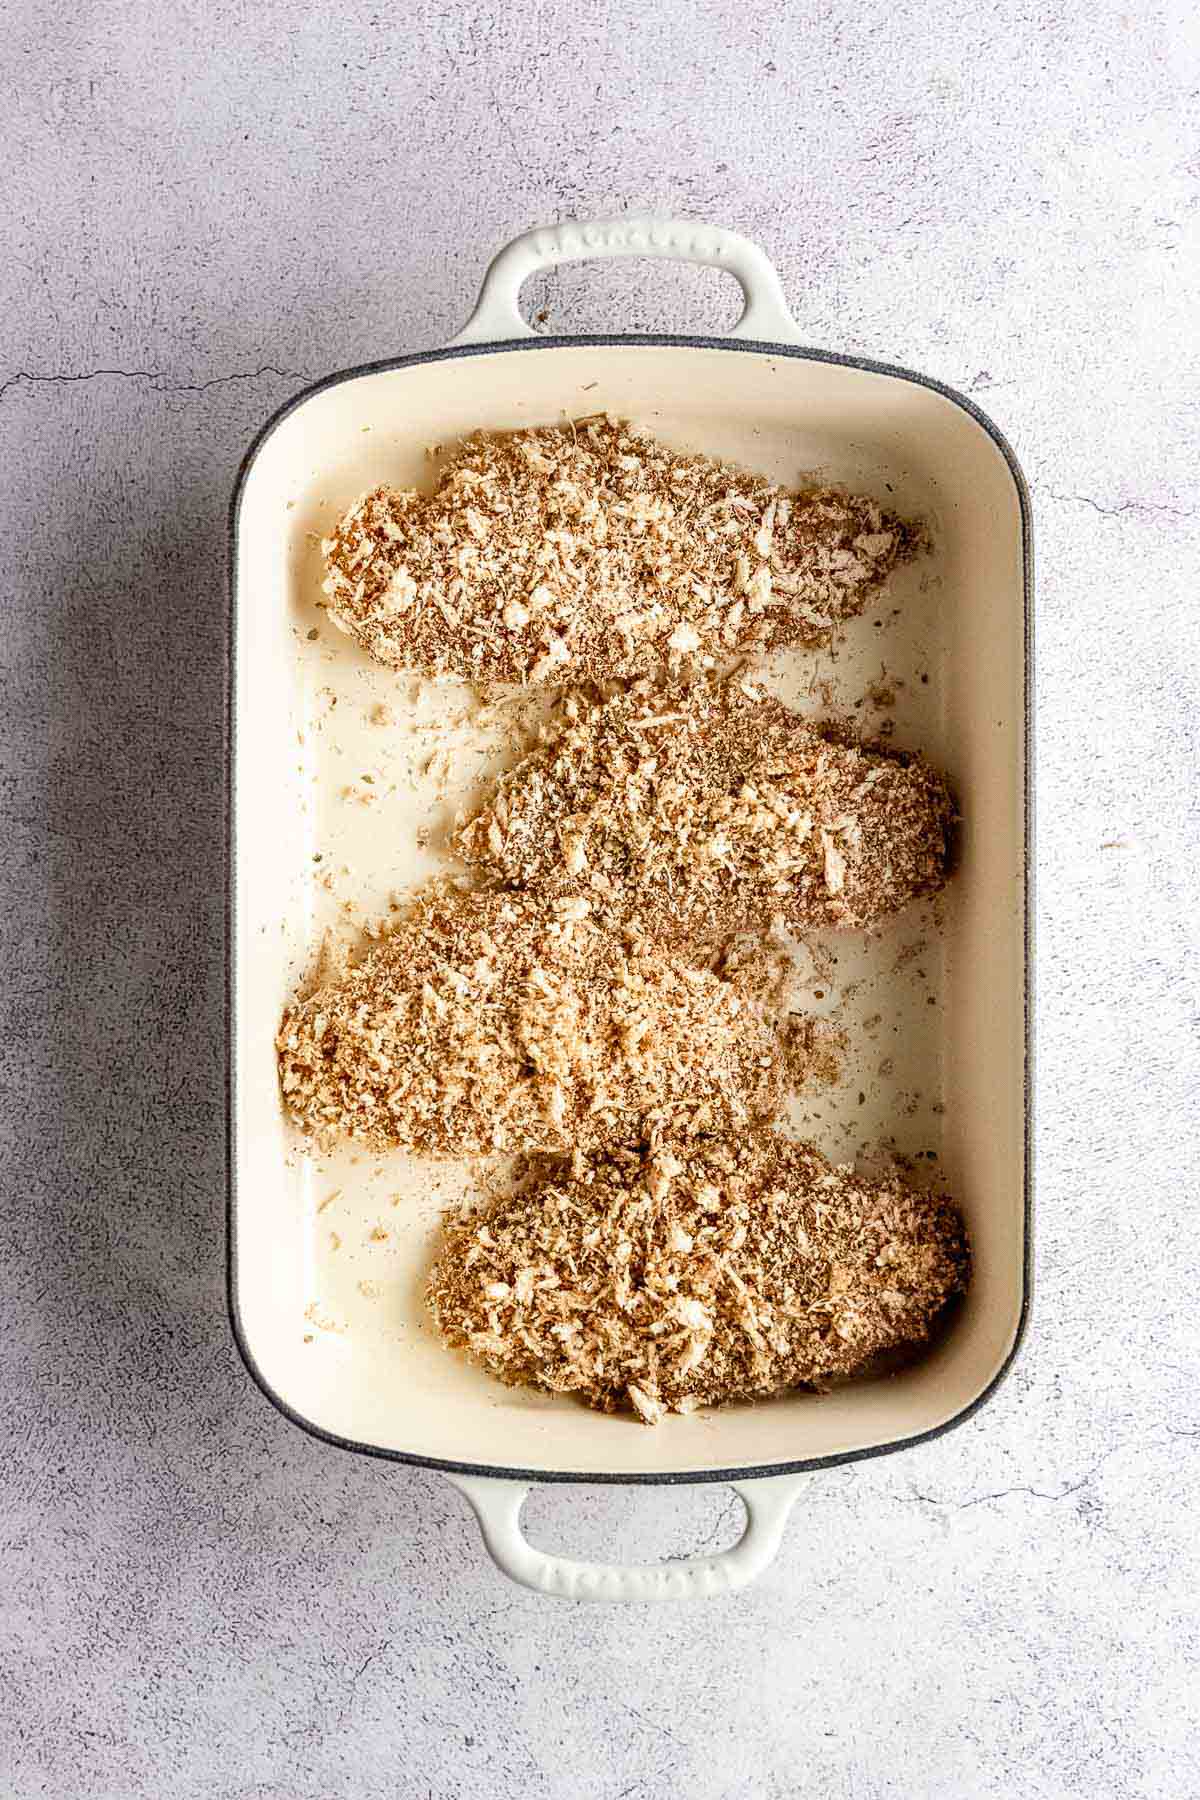 A baking dish filled with breaded chicken breasts.